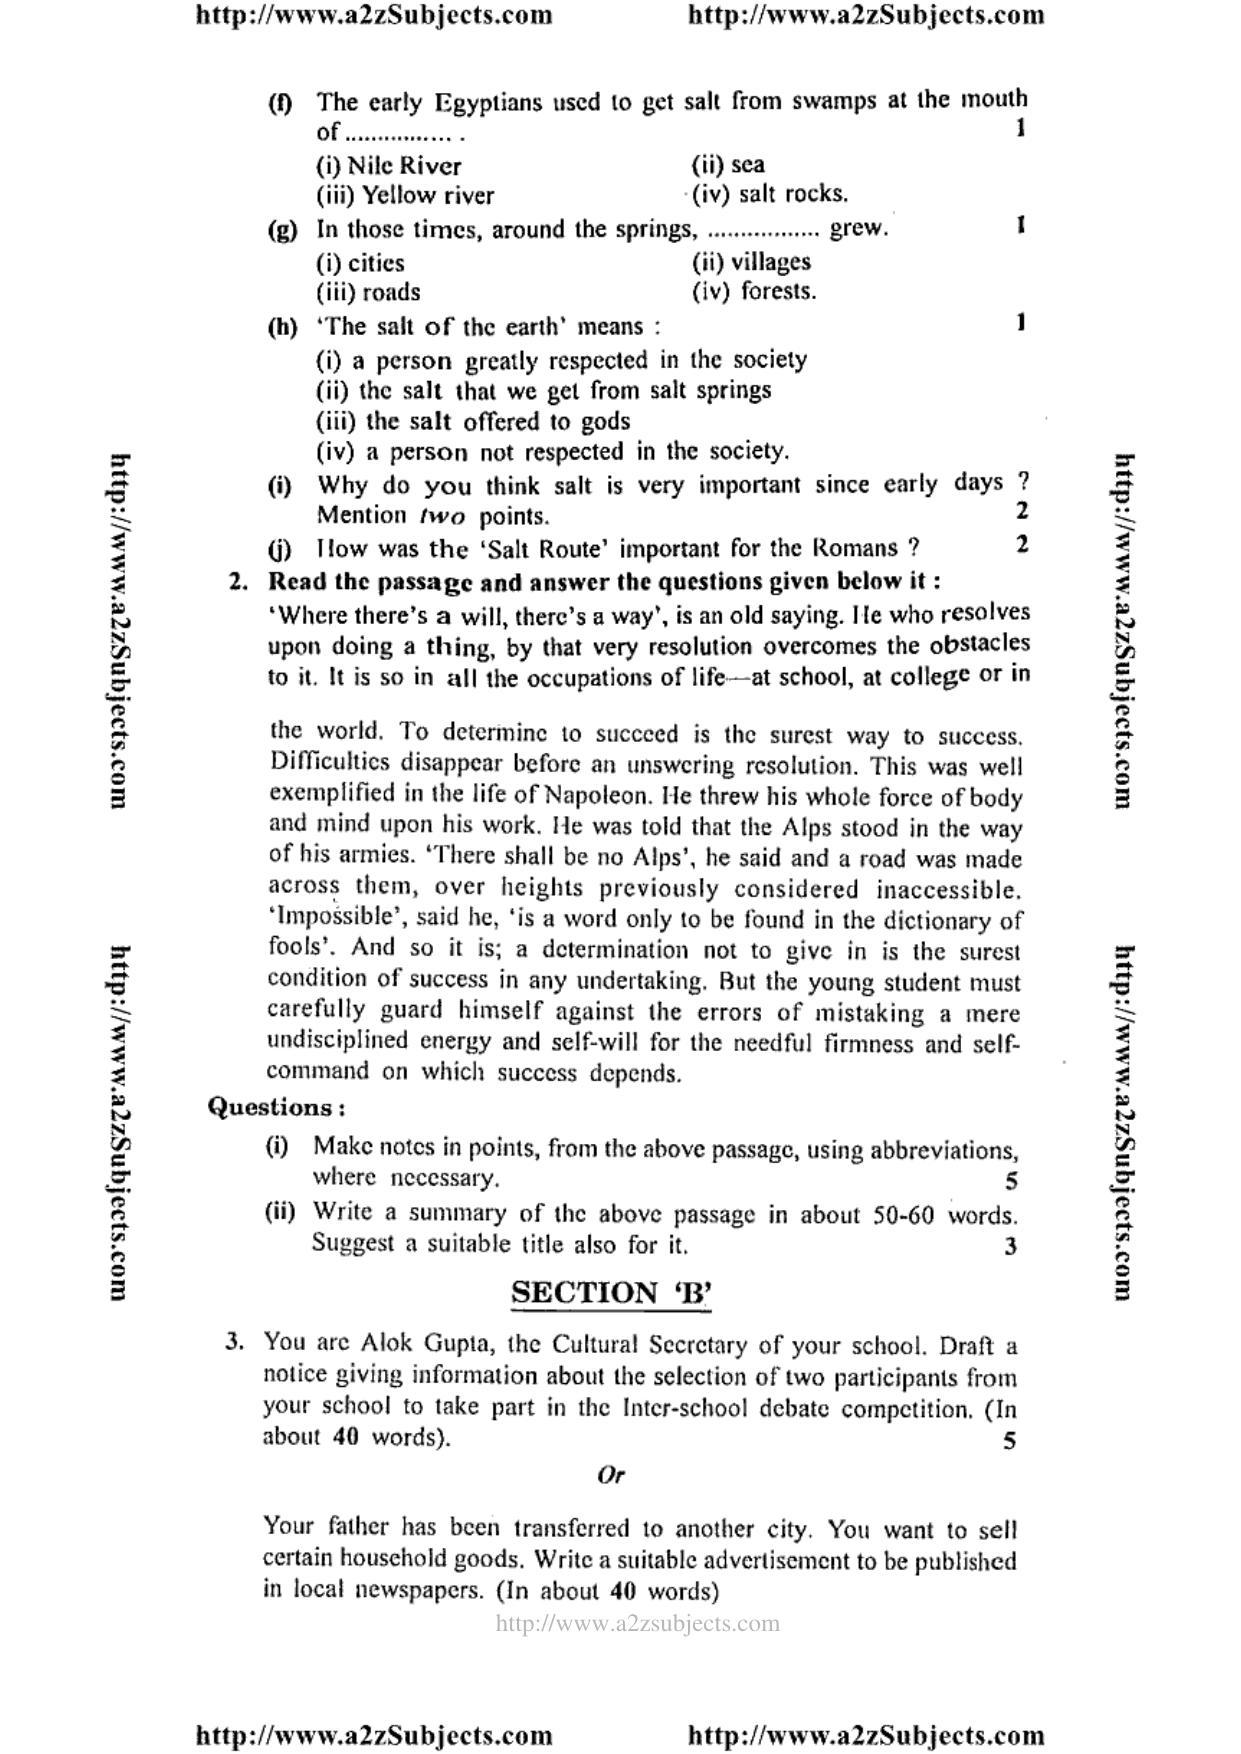 MP Board Class 12 English General 2014 Question Paper - Page 2